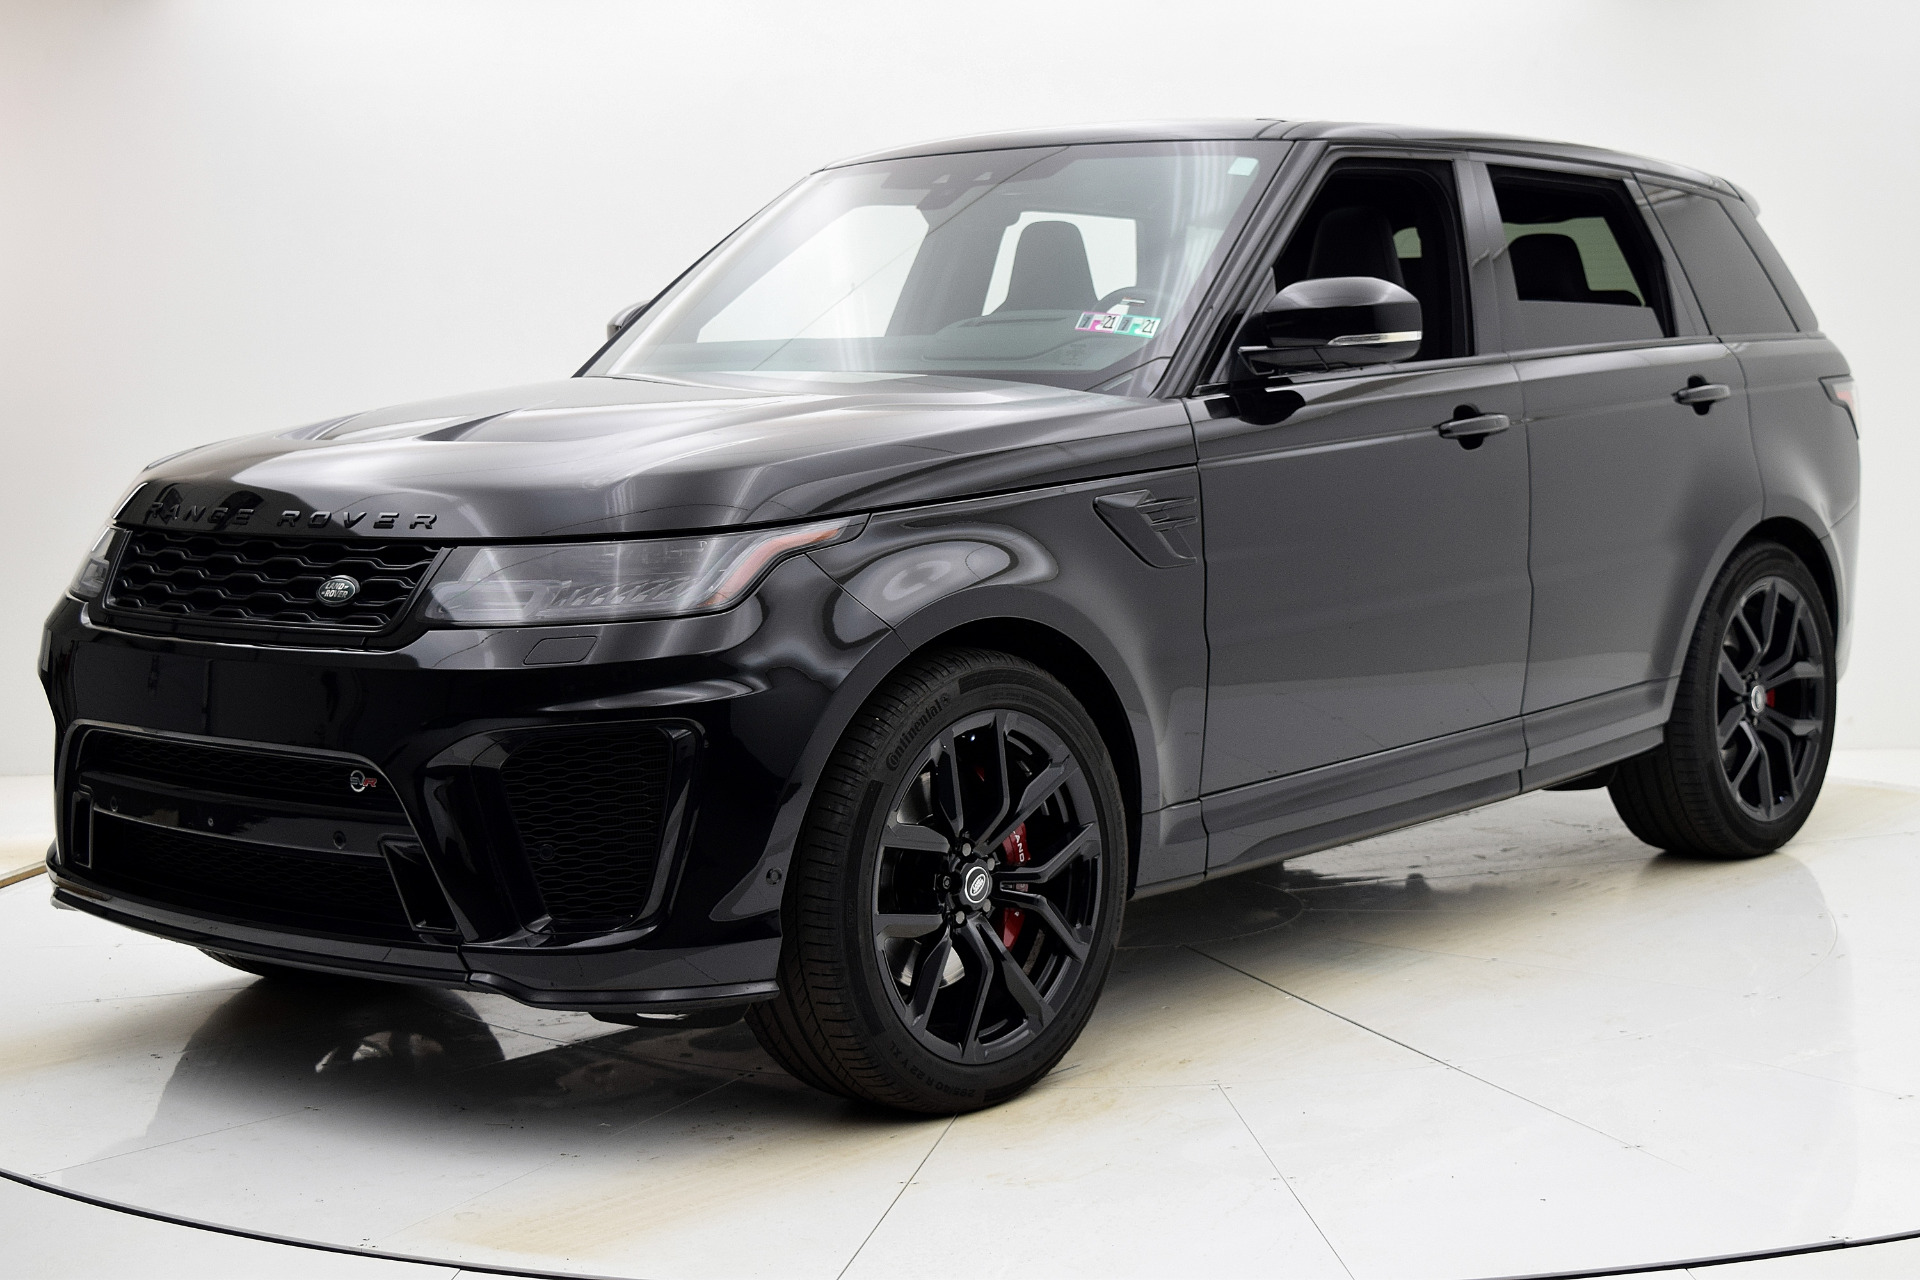 Used 2018 Land Rover Range Rover Sport SVR for sale Sold at F.C. Kerbeck Aston Martin in Palmyra NJ 08065 2